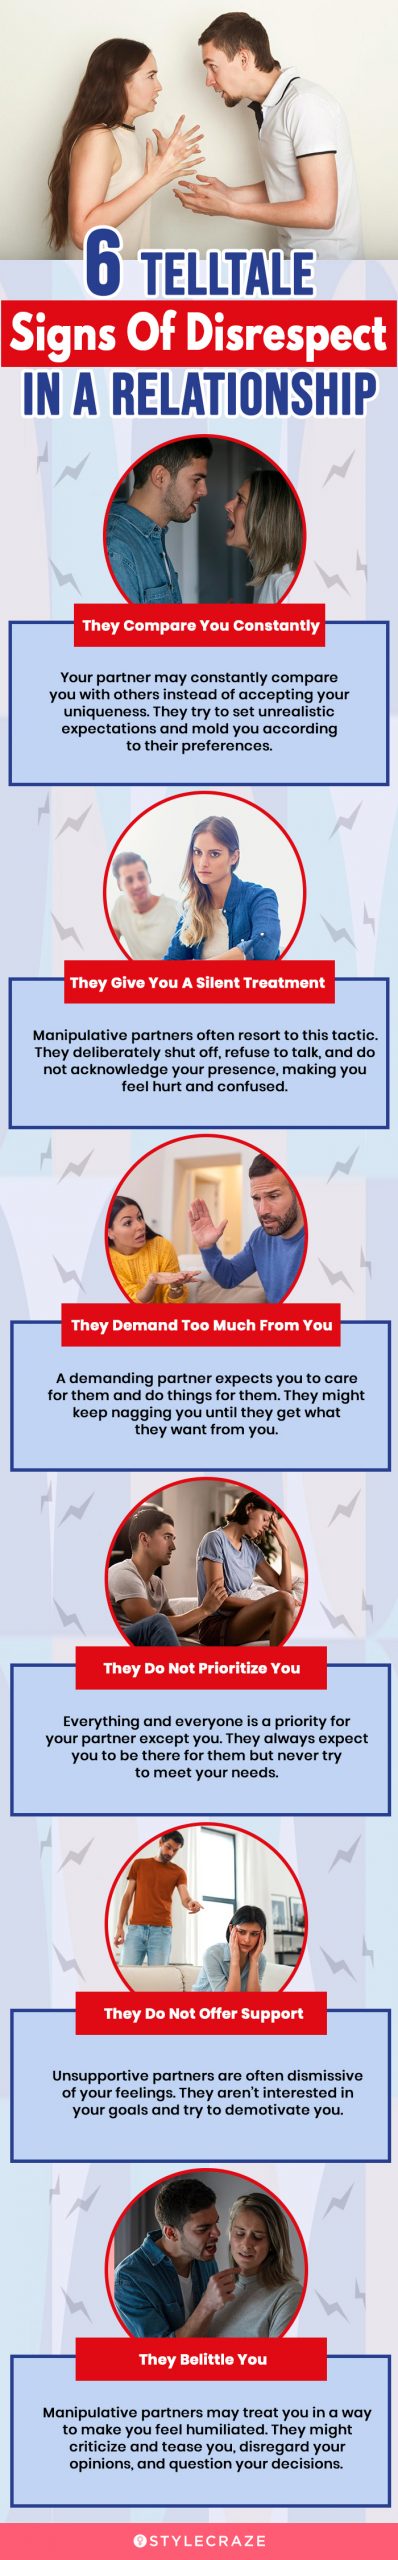 infographic definition of respect in relationships